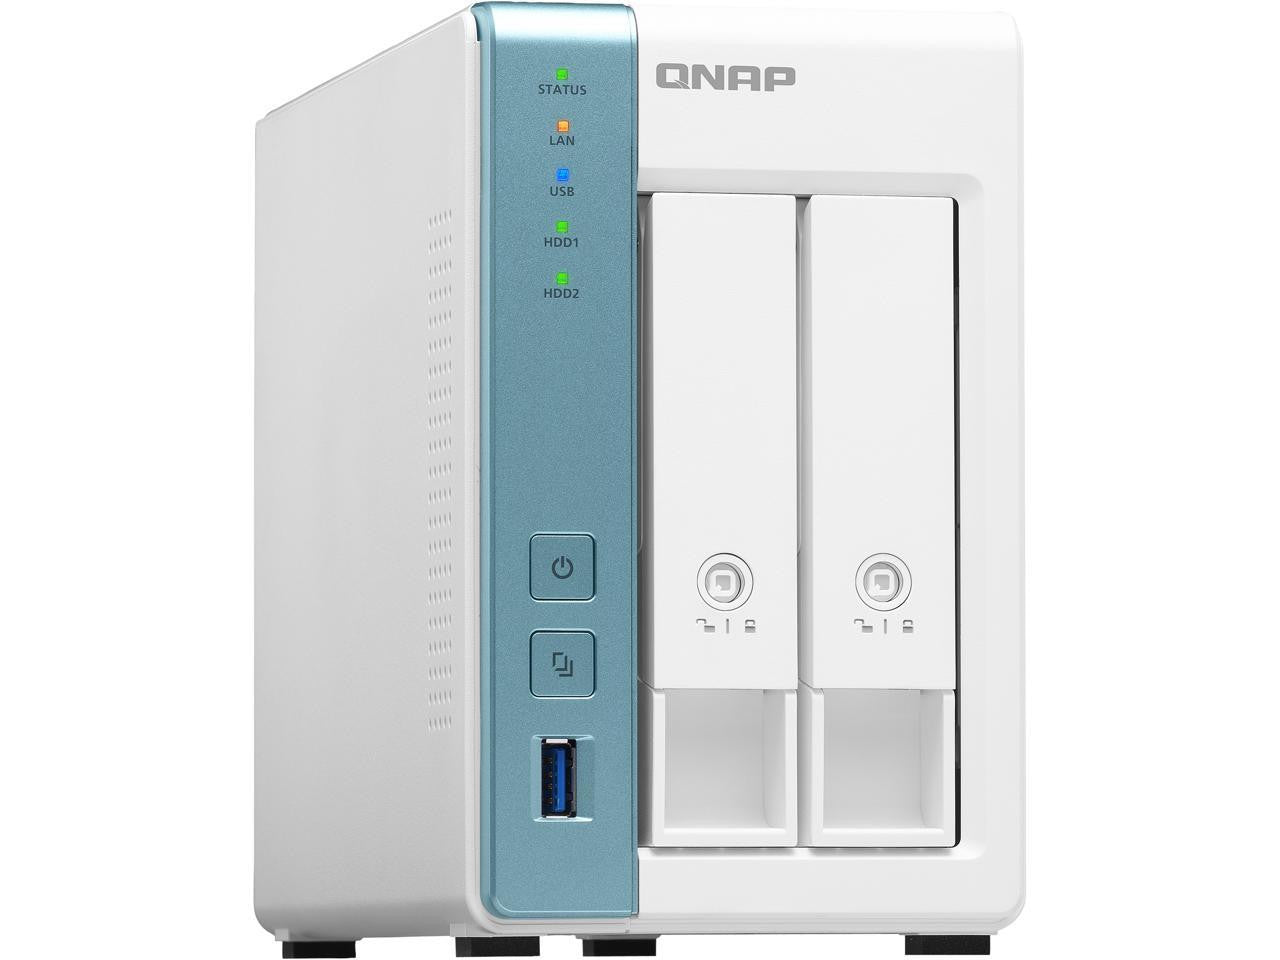 QNAP TS-231K 2-Bay Home NAS with 8TB (2 x 4TB) of Western Digital Red Plus Drives Fully Assembled and Tested